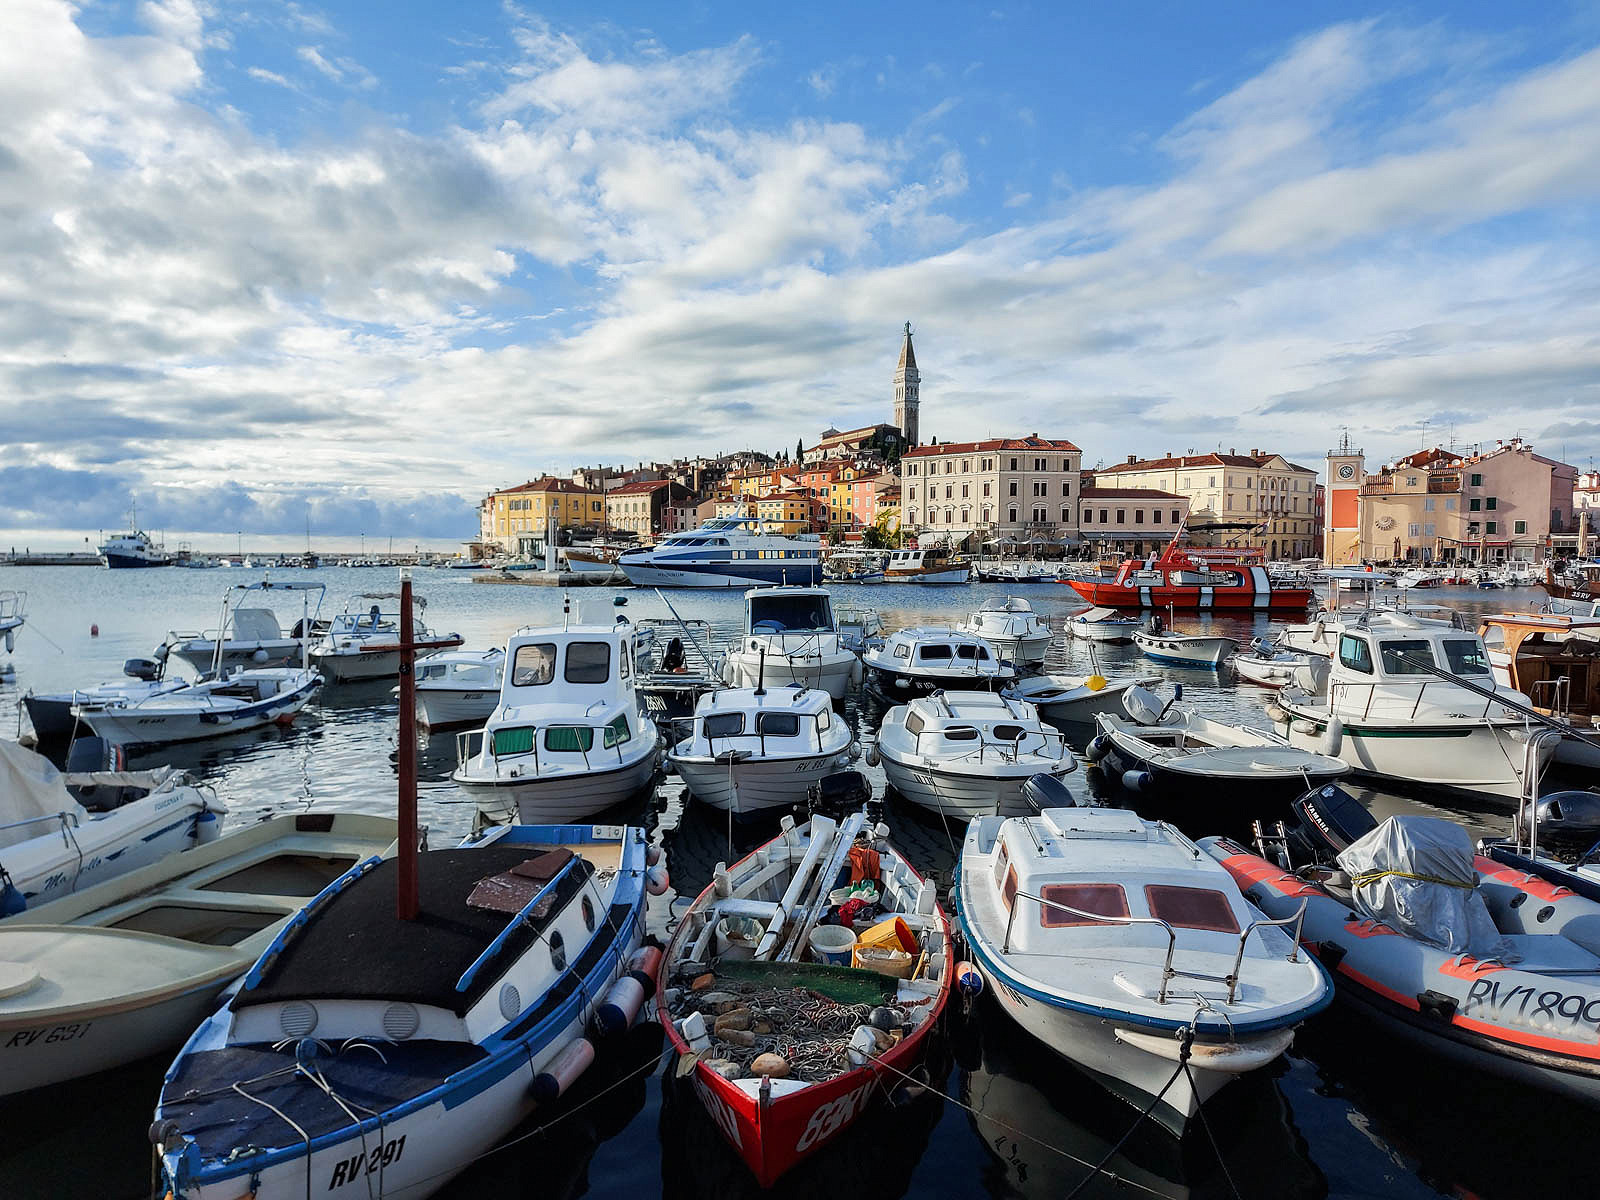 A Week in Rovinj, Istria - Why We Love it, Where to Stay, Shop and Eat